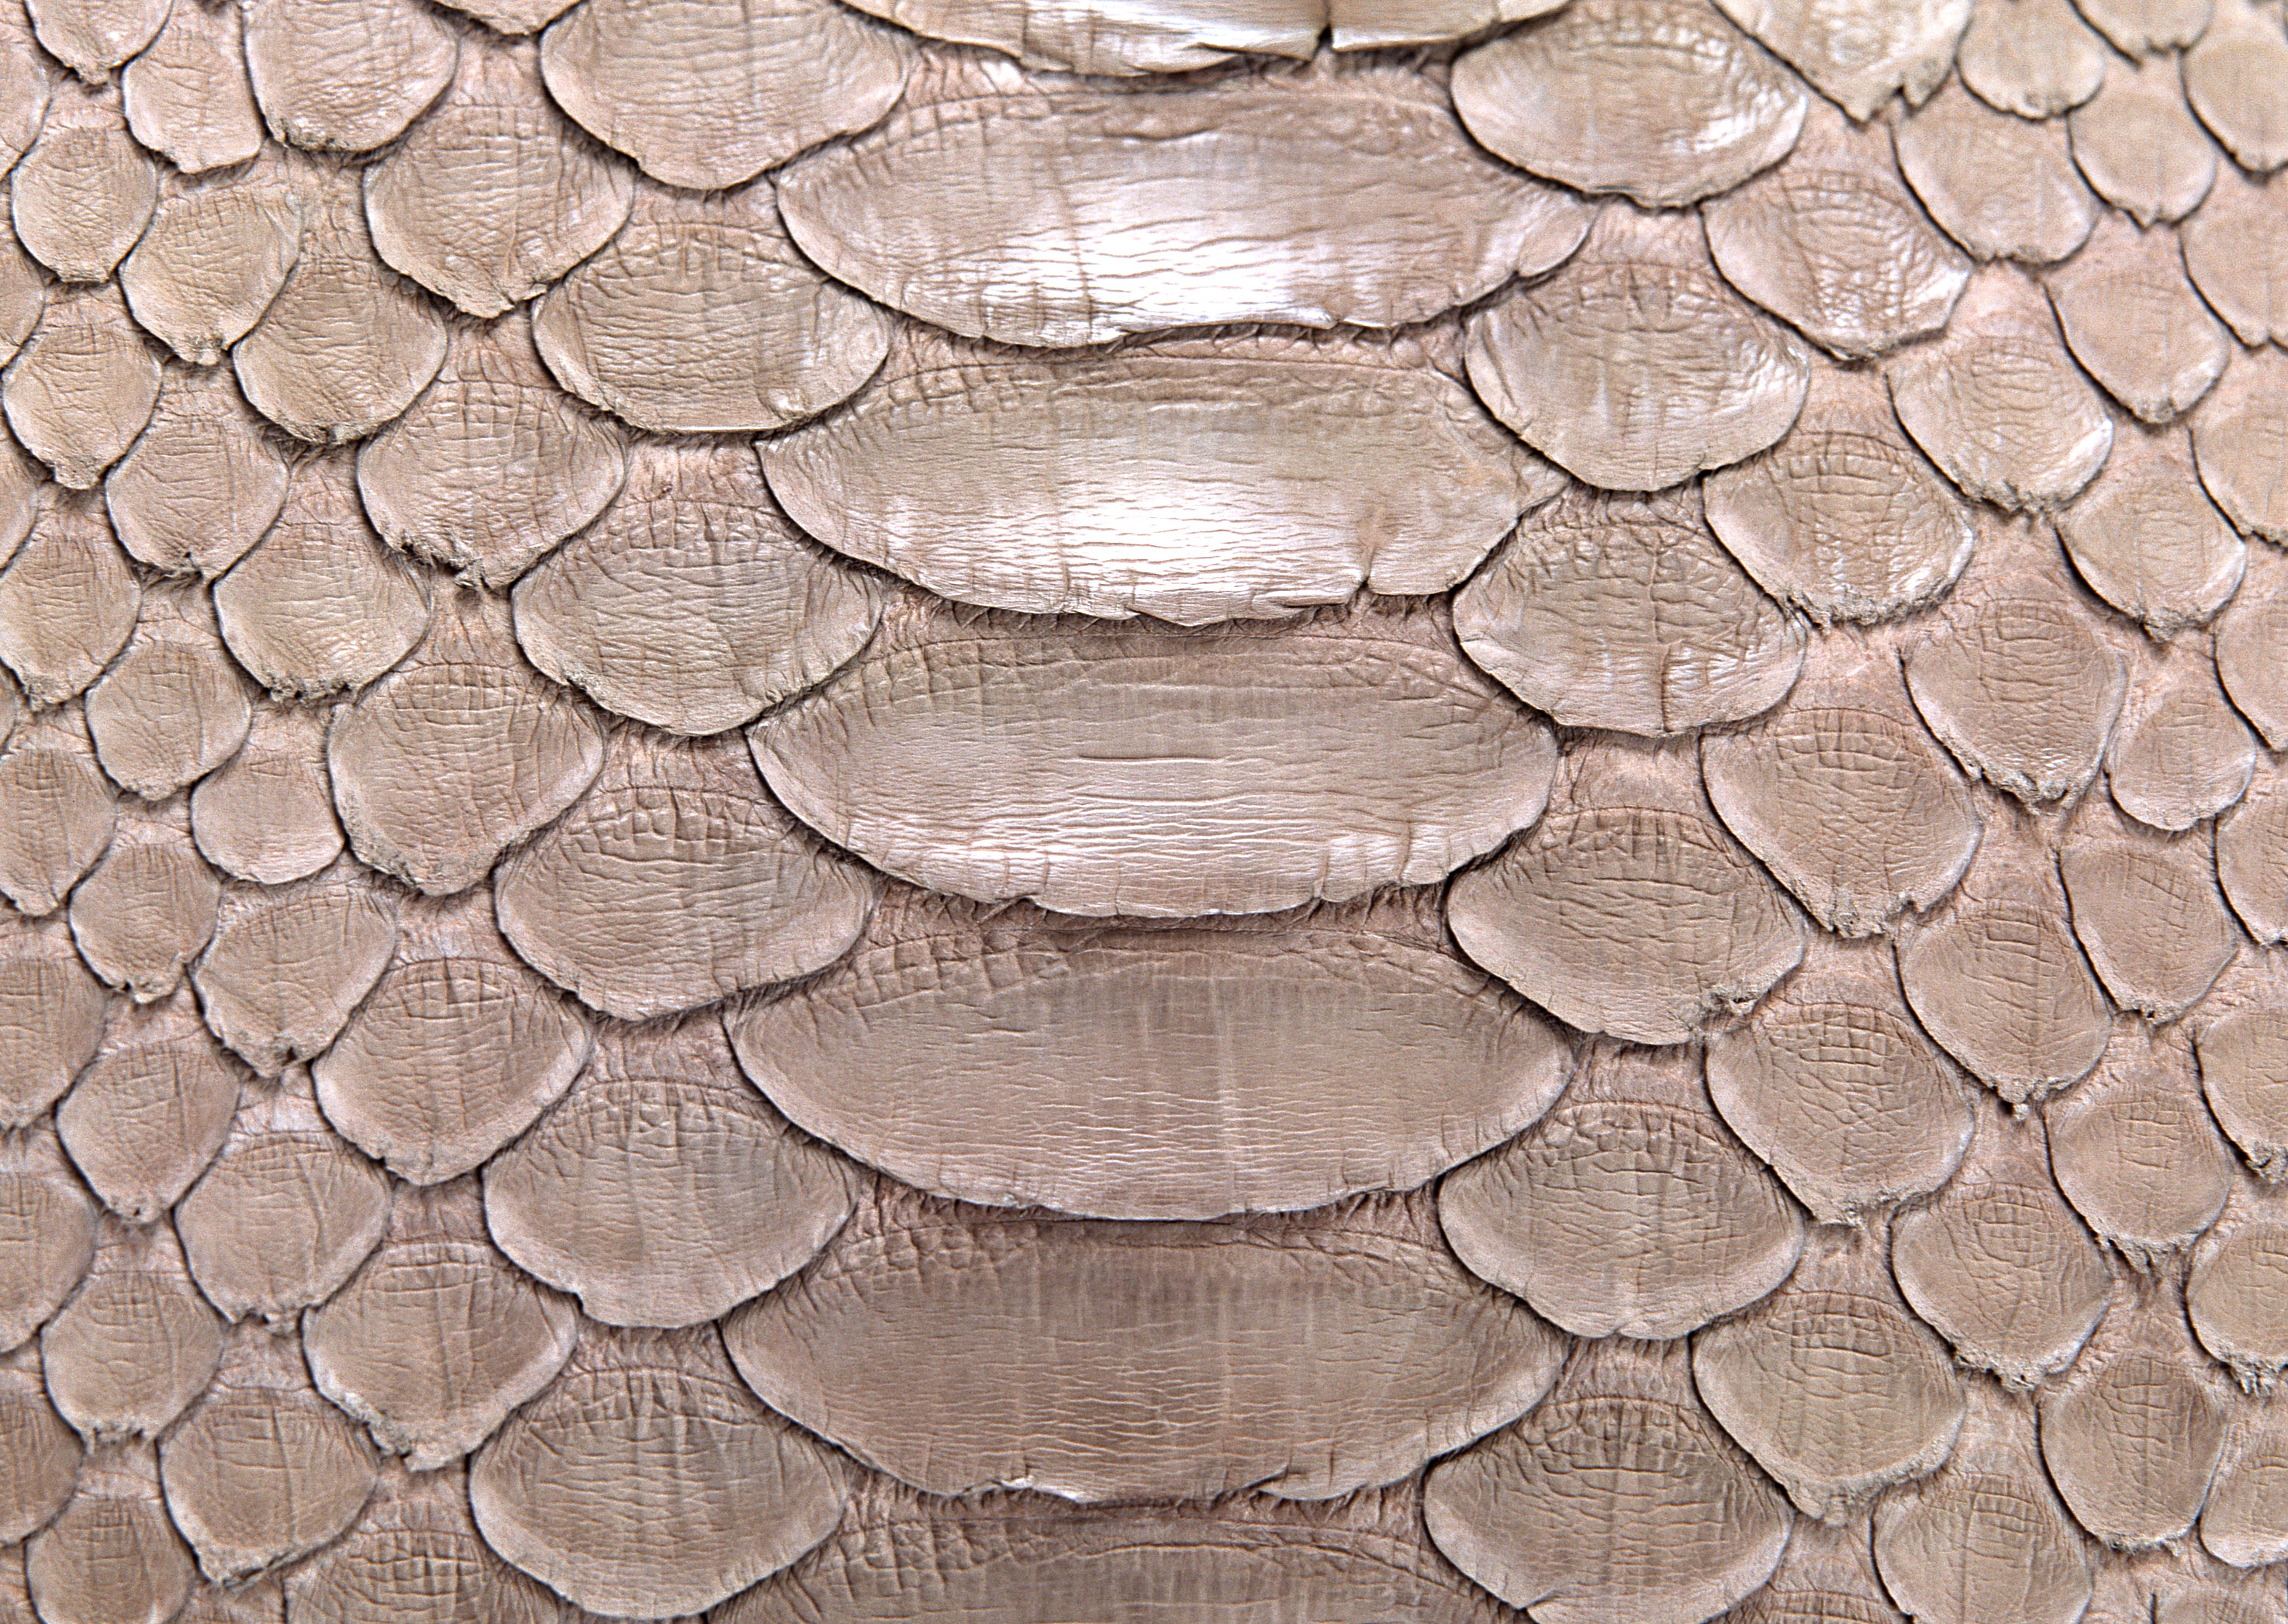 Snake leather texture background image download, snakes